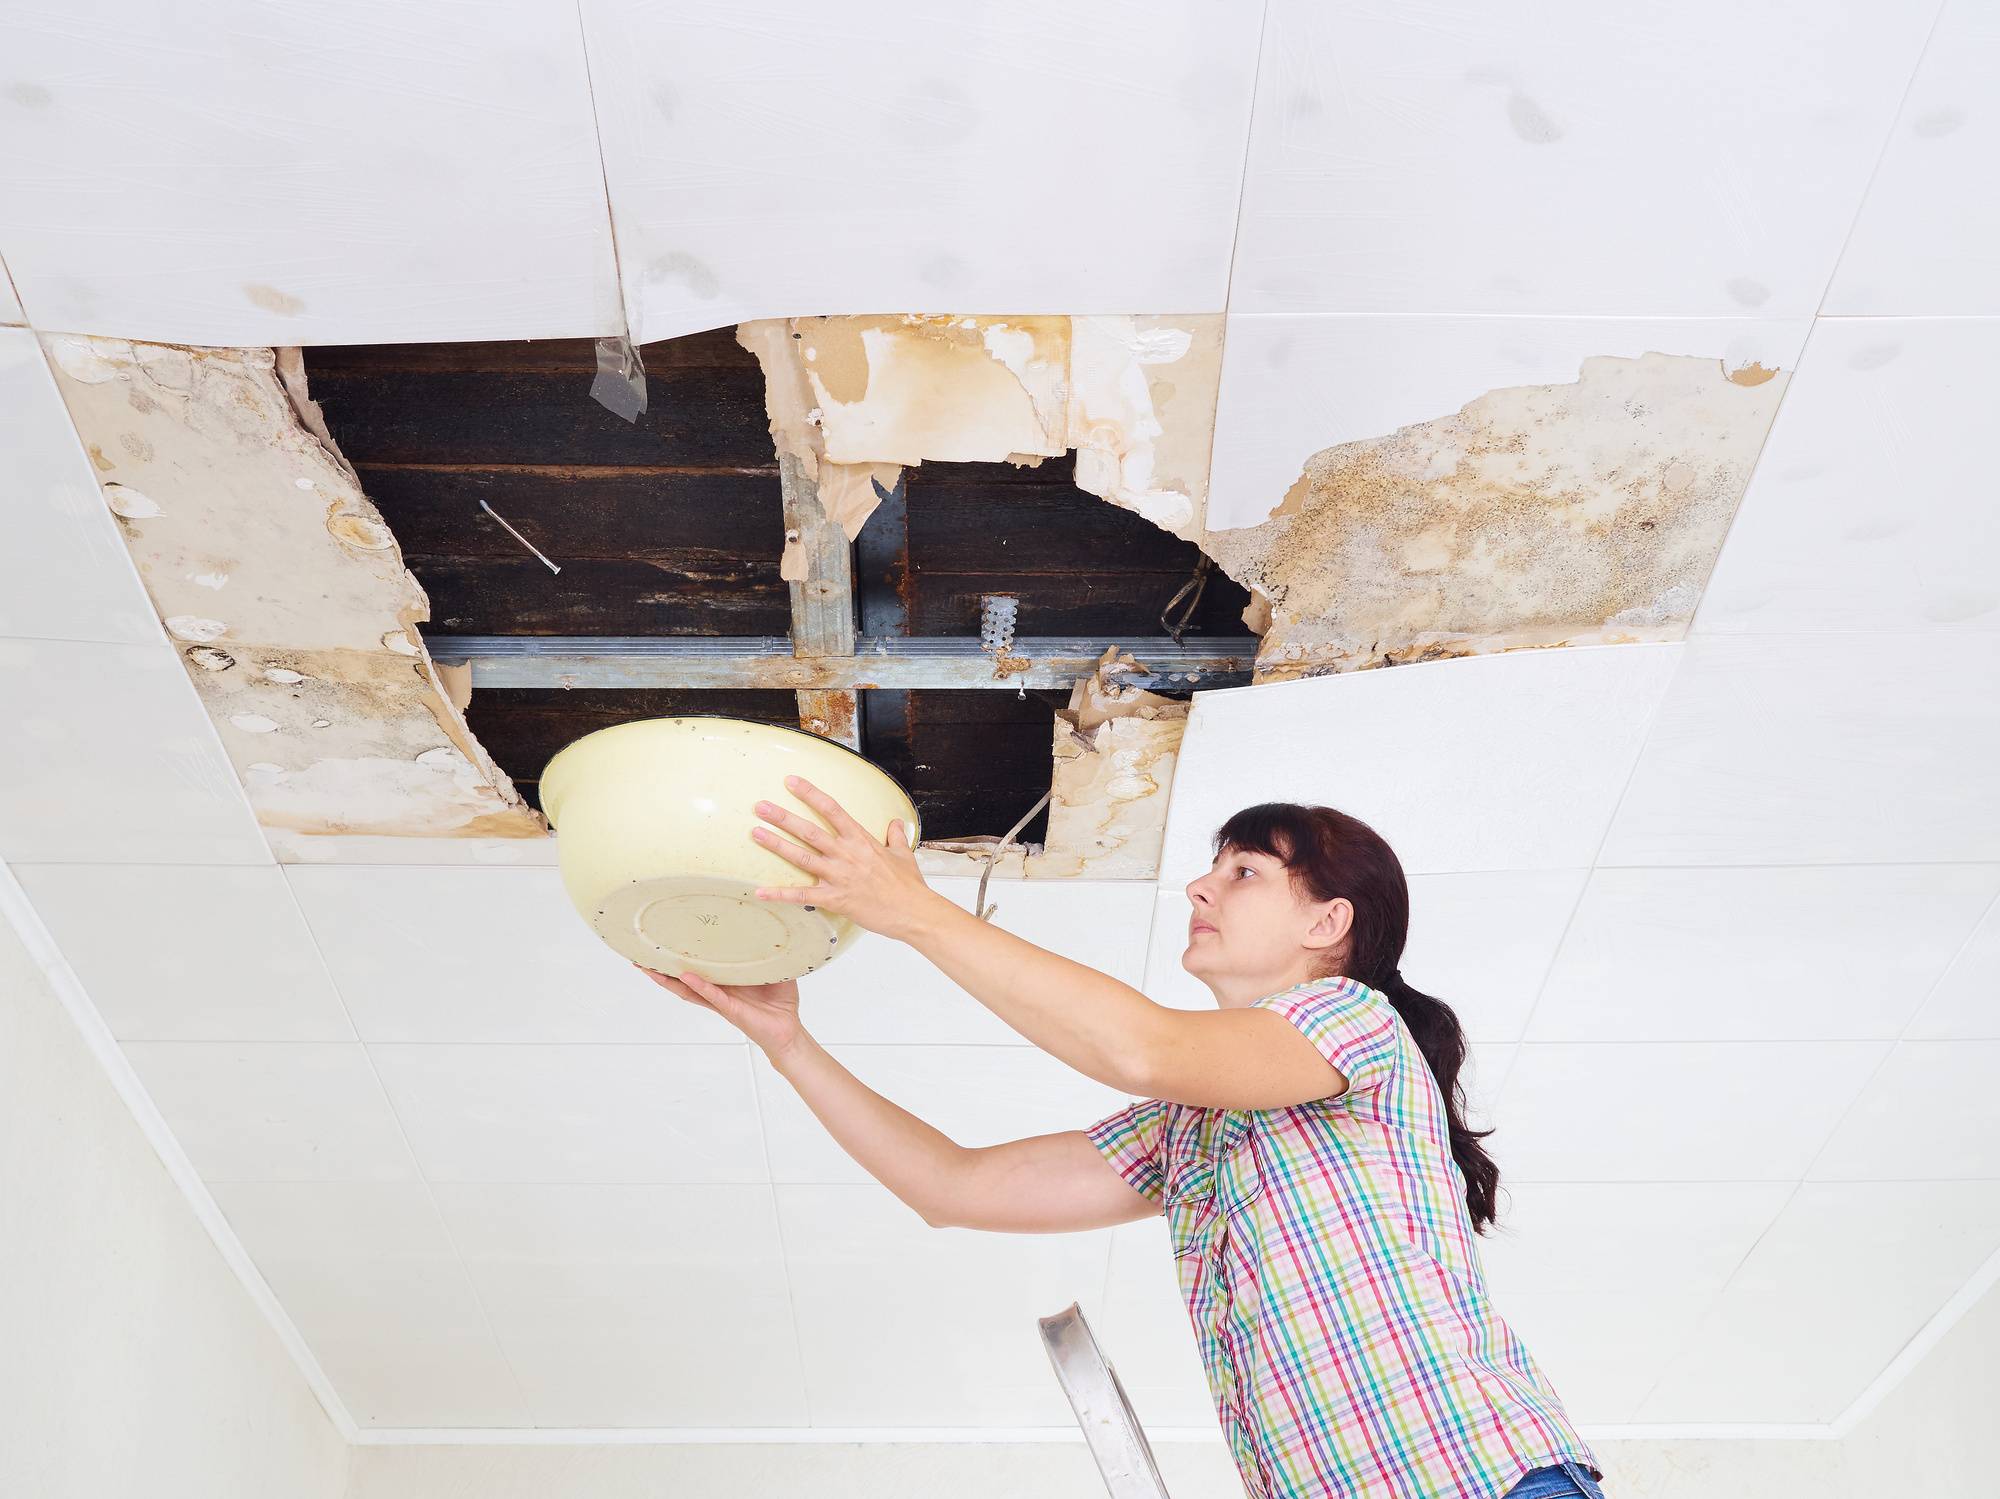 Why You Never Want to Ignore a Roof Leak (And What to Do About It)